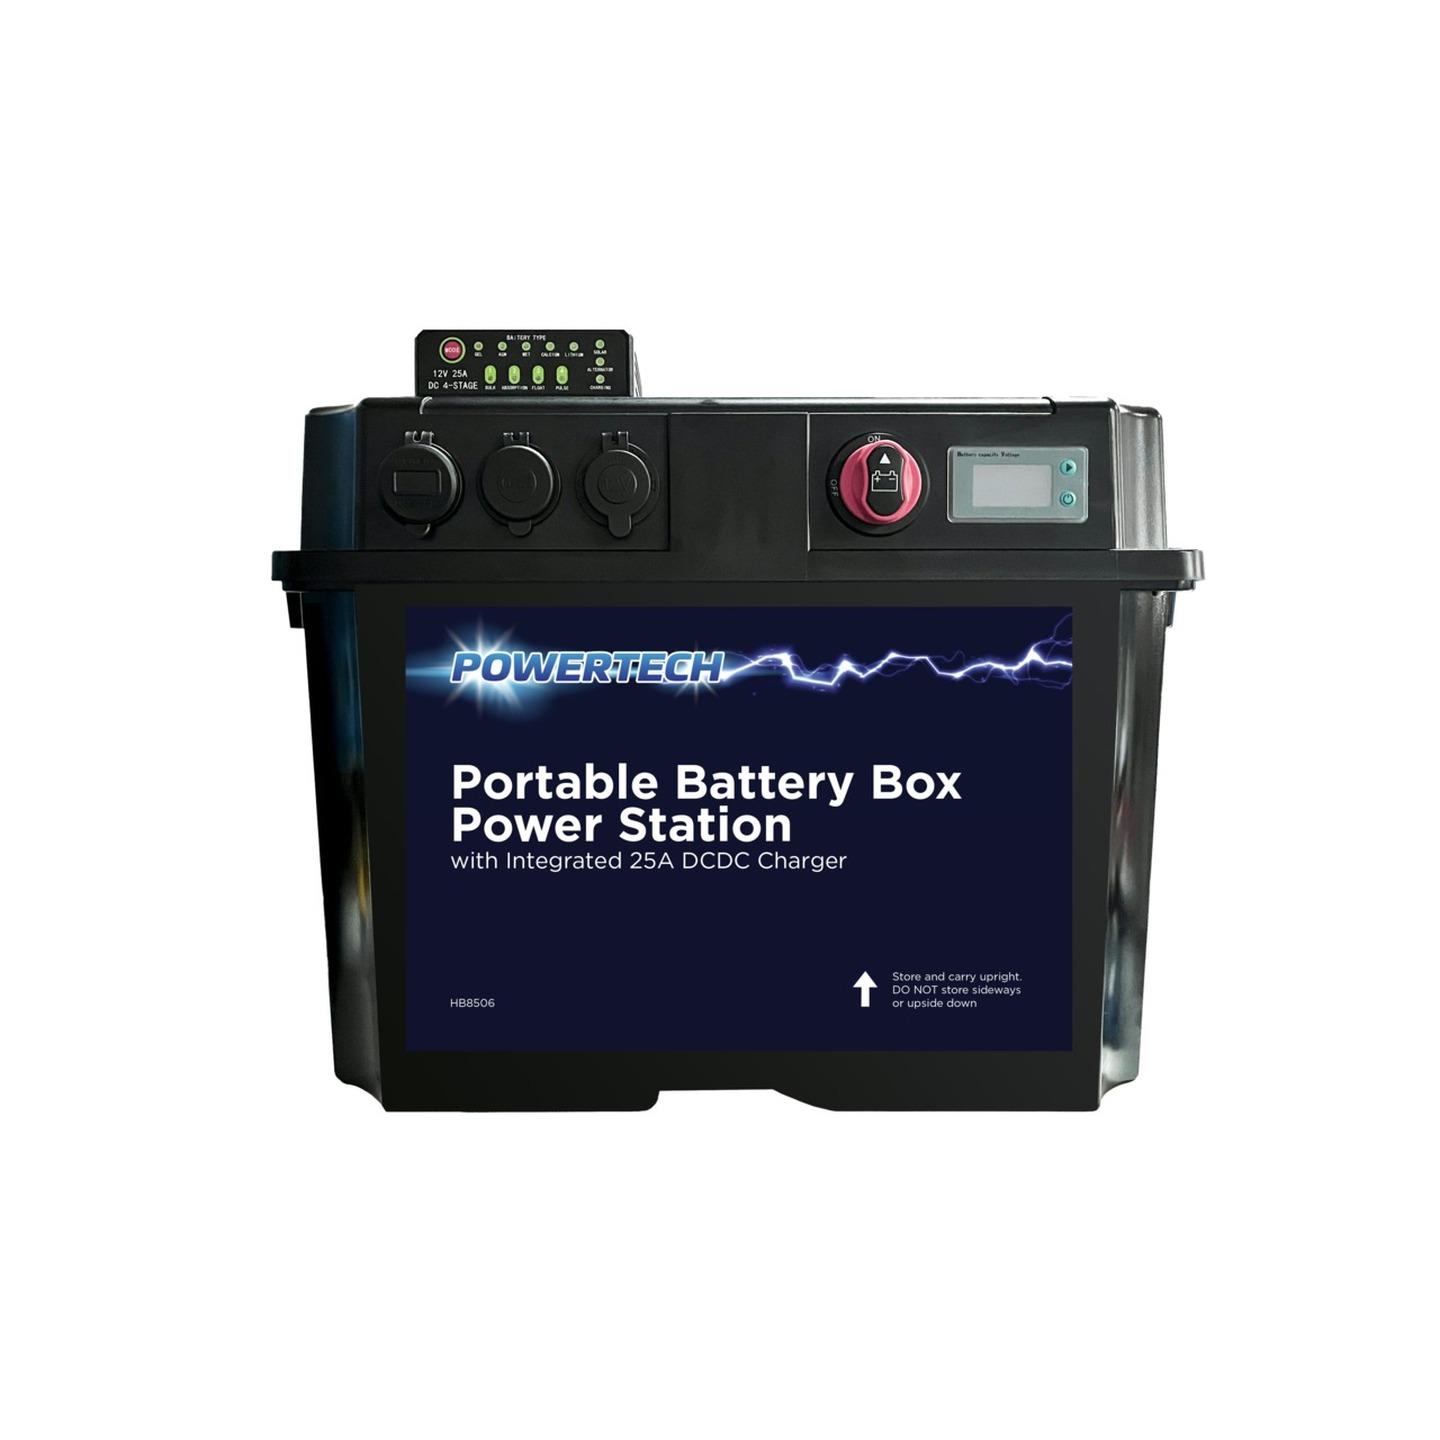 Portable Battery Box Power Station with Integrated 25A DCDC Charger